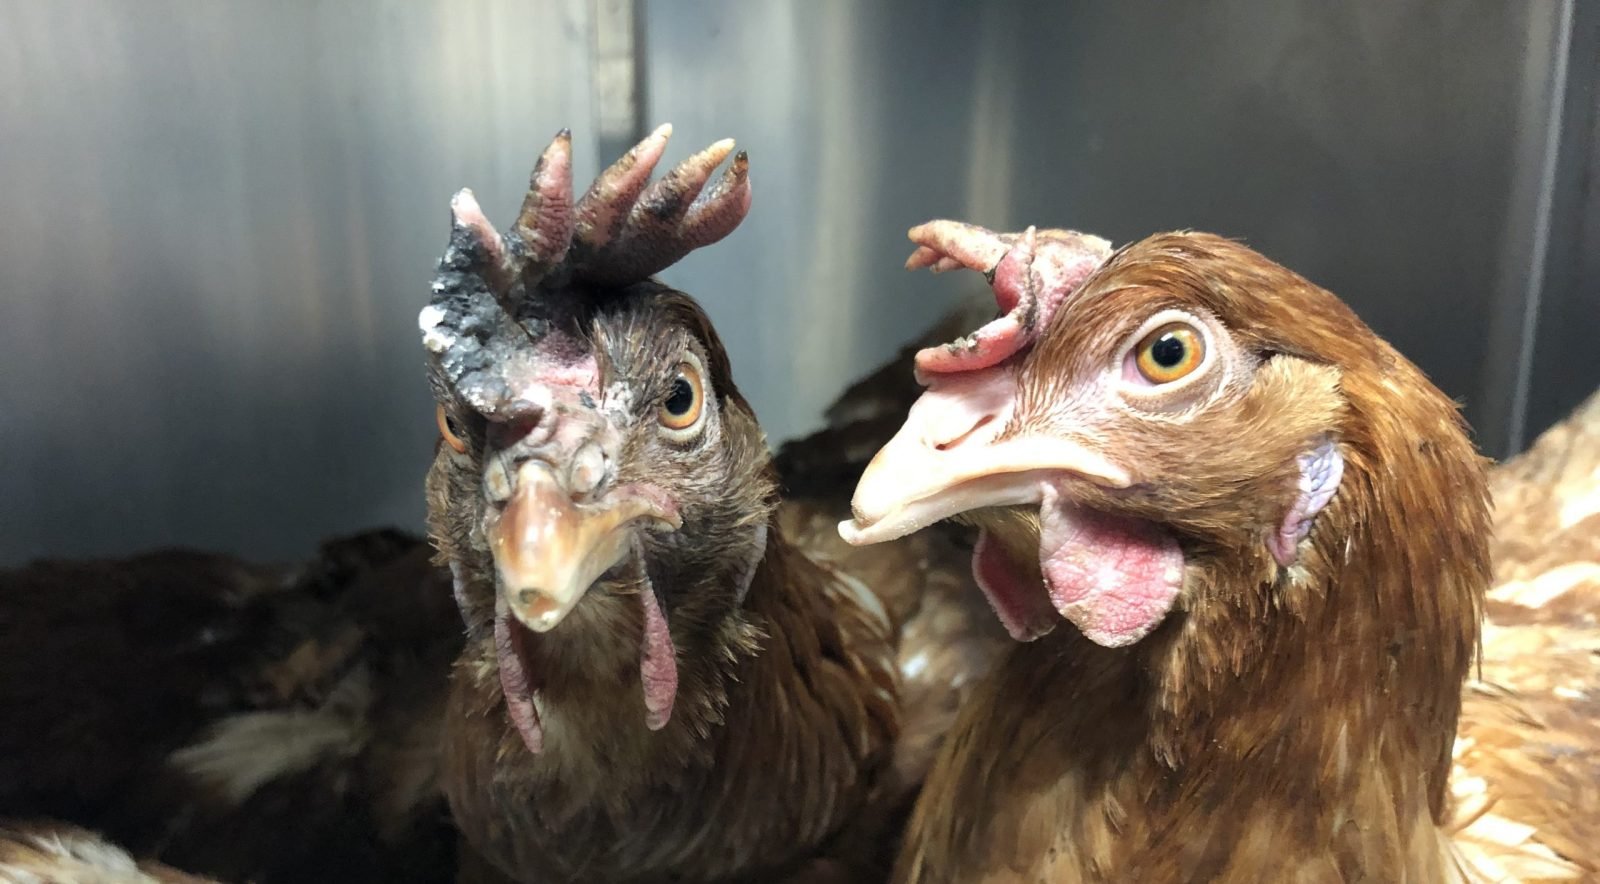 Hens from NJ fires with burned combs